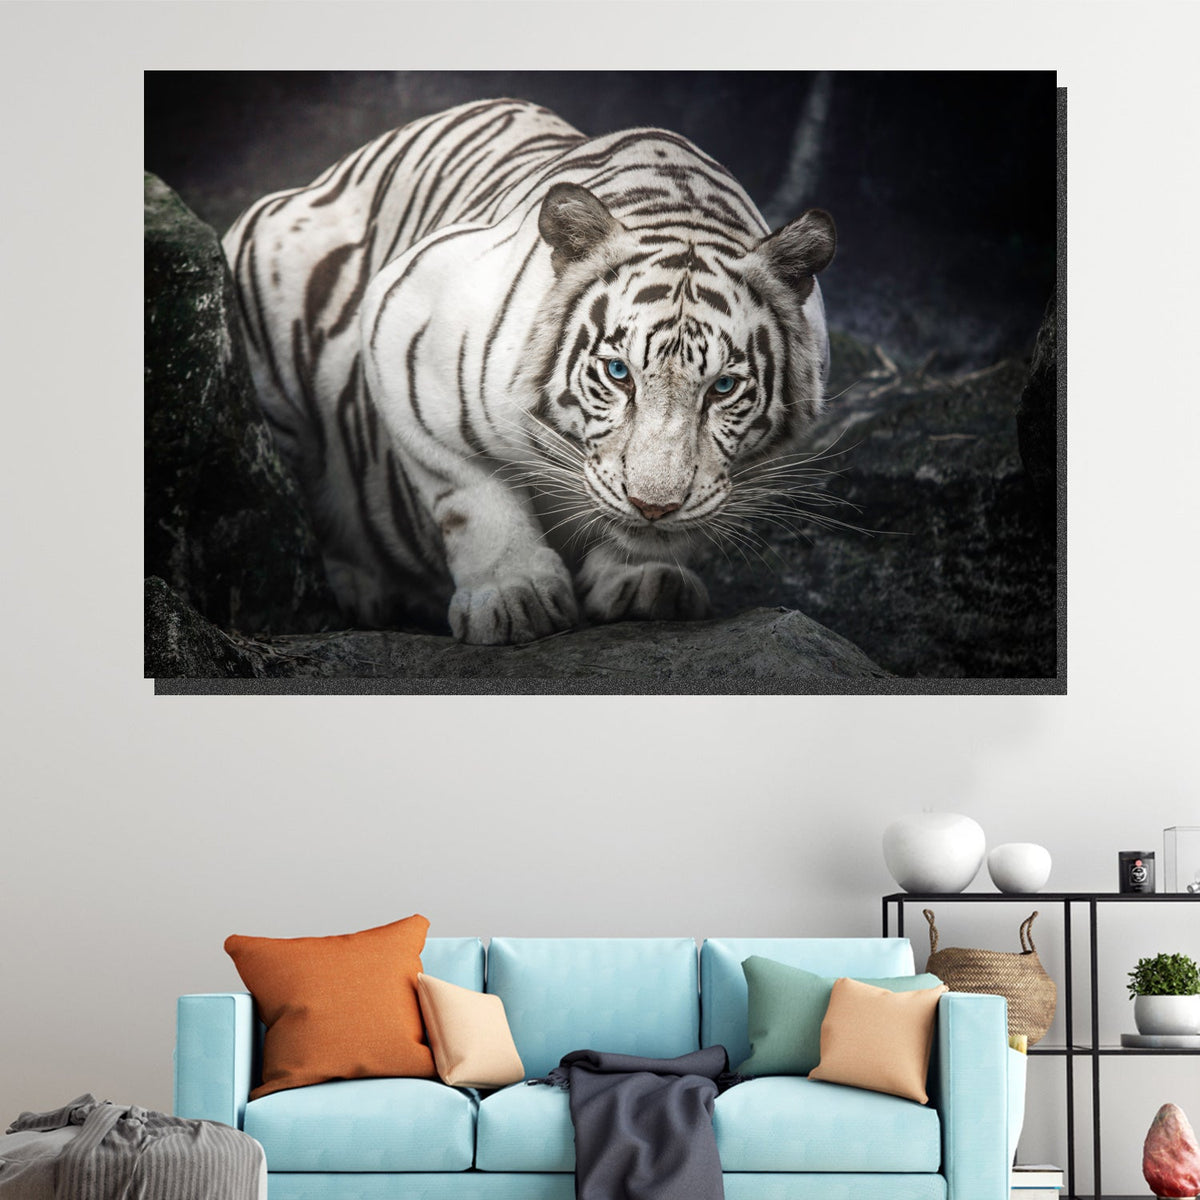 https://cdn.shopify.com/s/files/1/0387/9986/8044/products/CrouchingTigerCanvasArtprintStretched-3.jpg